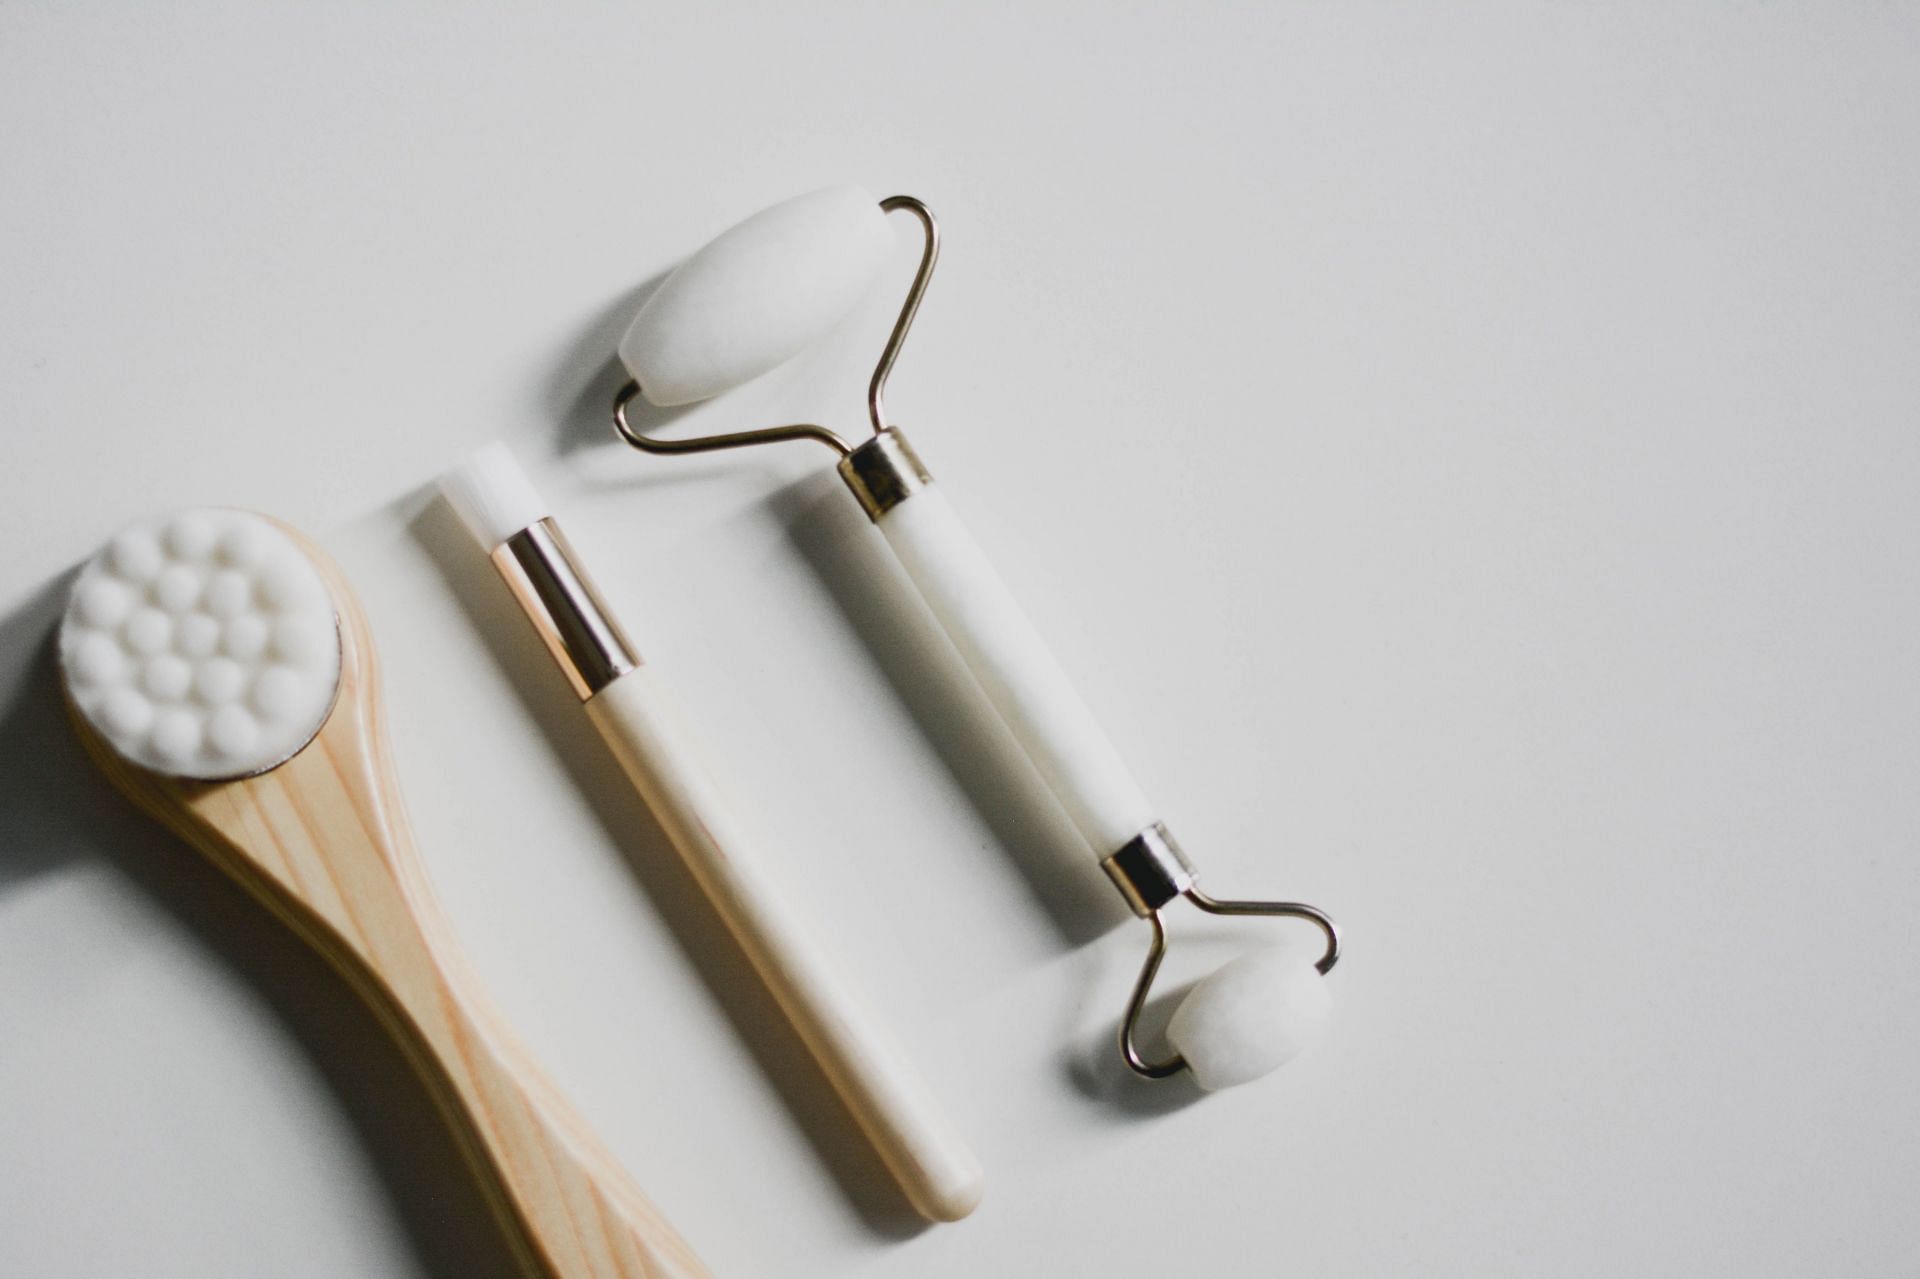 Japanese skincare routine promotes using gua sha or face tool promotes healthy skin barrier. (Image via Unsplash / Content Pixie)